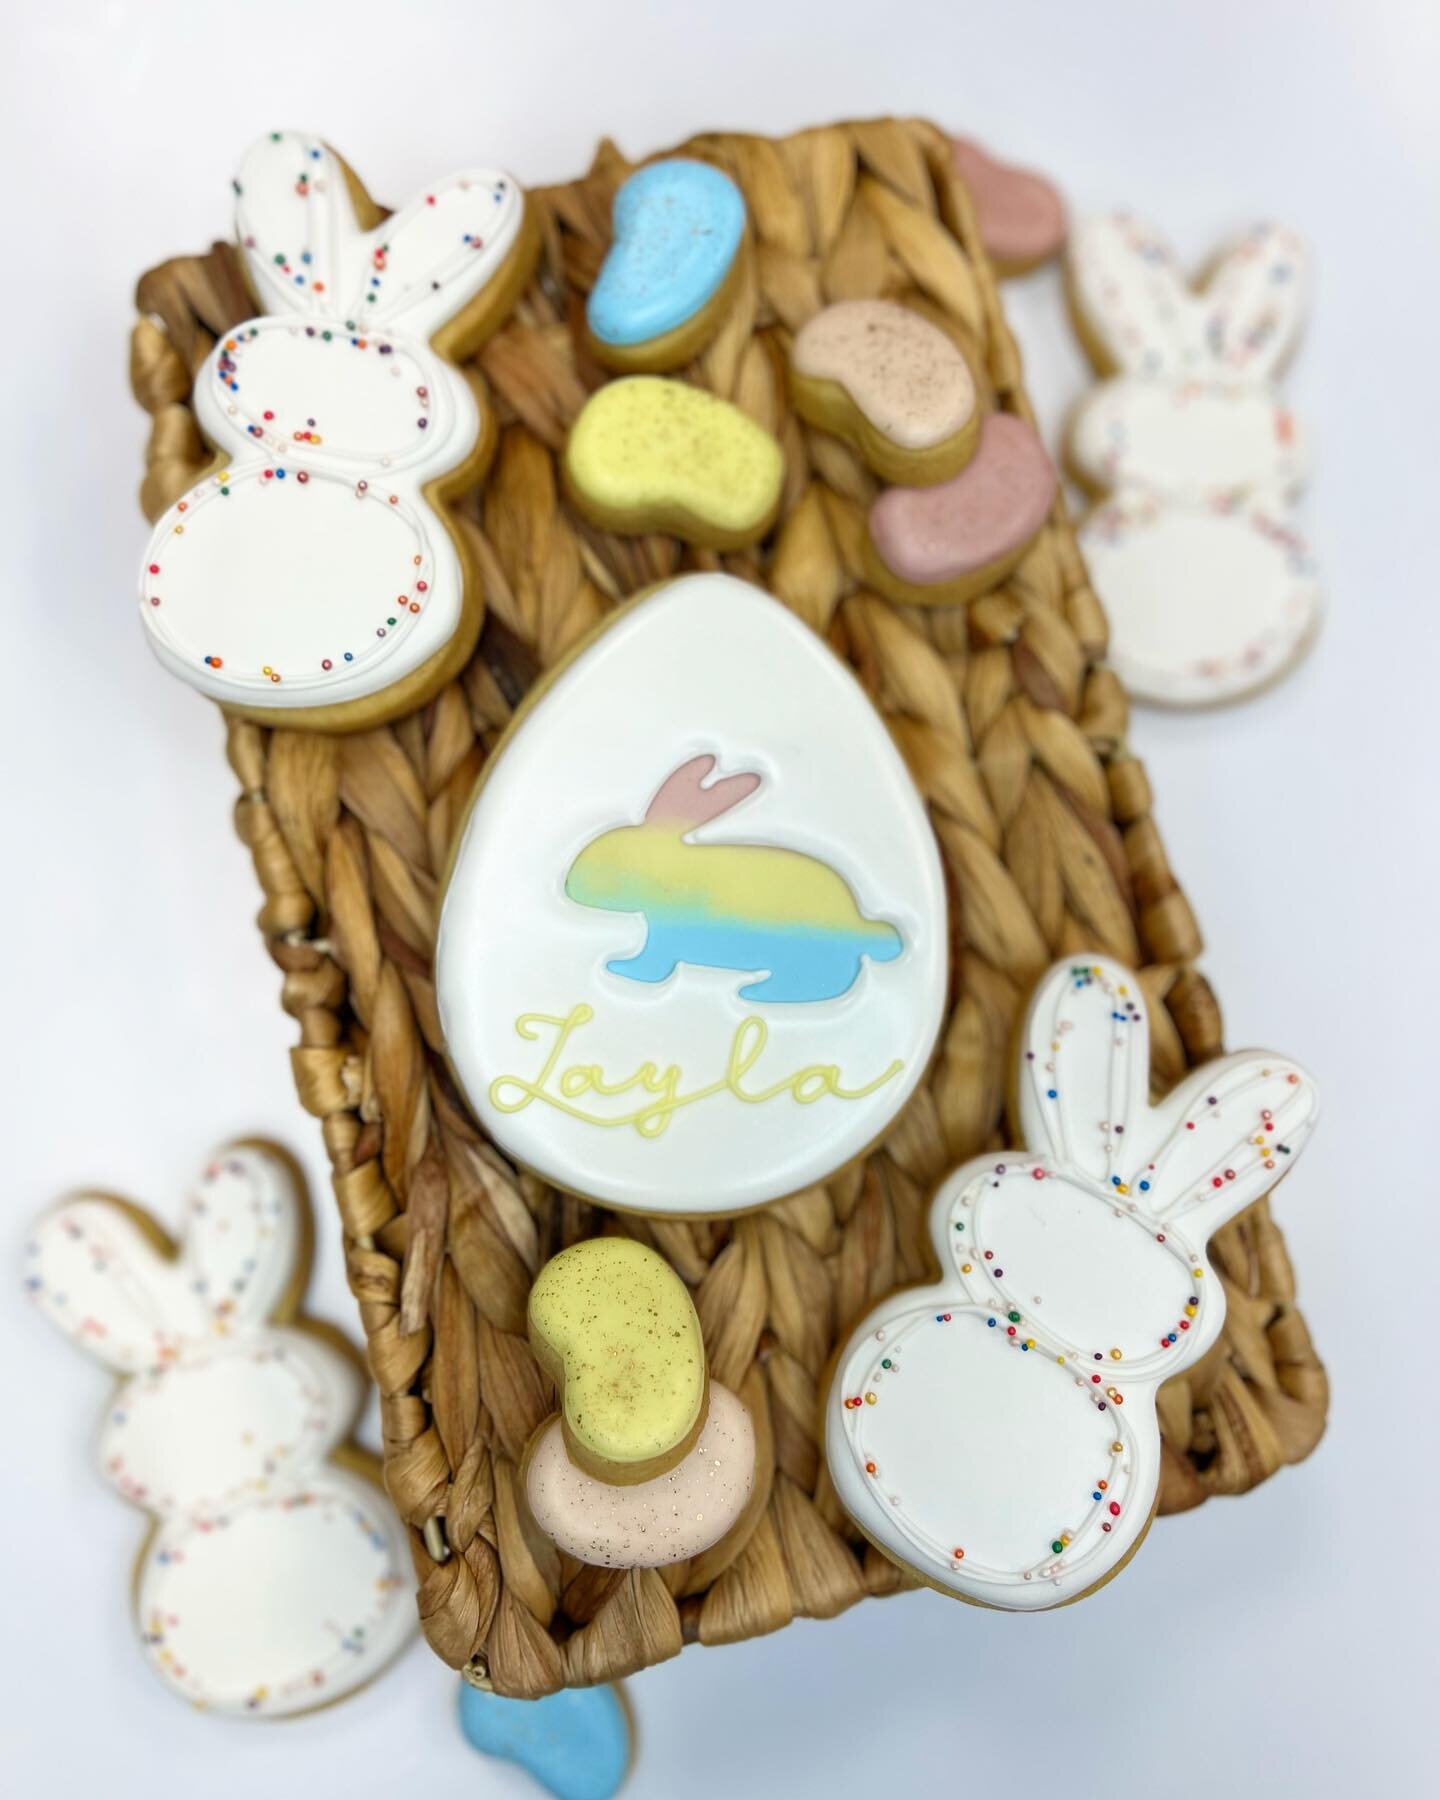 Our Easter pre order is LIVE! Get your orders in because it's right around the corner!

#cookies #buffalo #buffalony #buffalobakery #easter #easterdecor #eastertreats #easterbasket